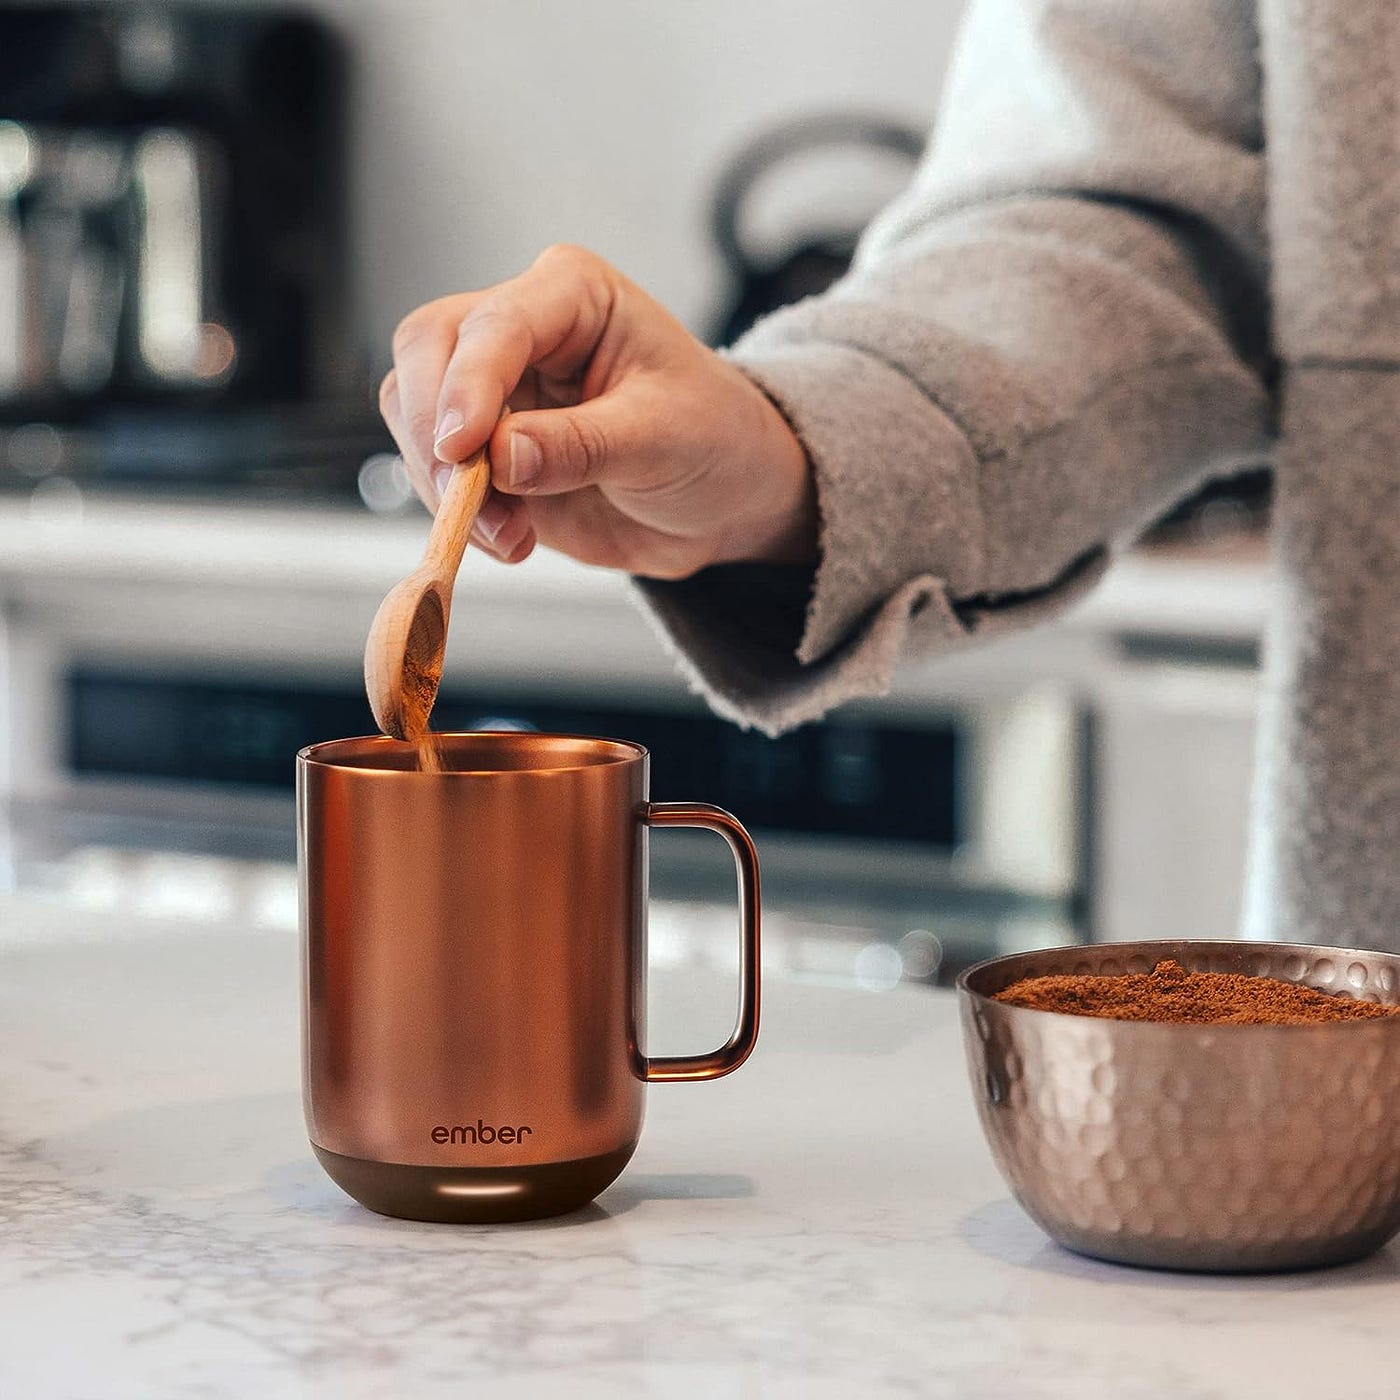 The Best Temperature-Controlled Mug For Perfect Morning Coffee